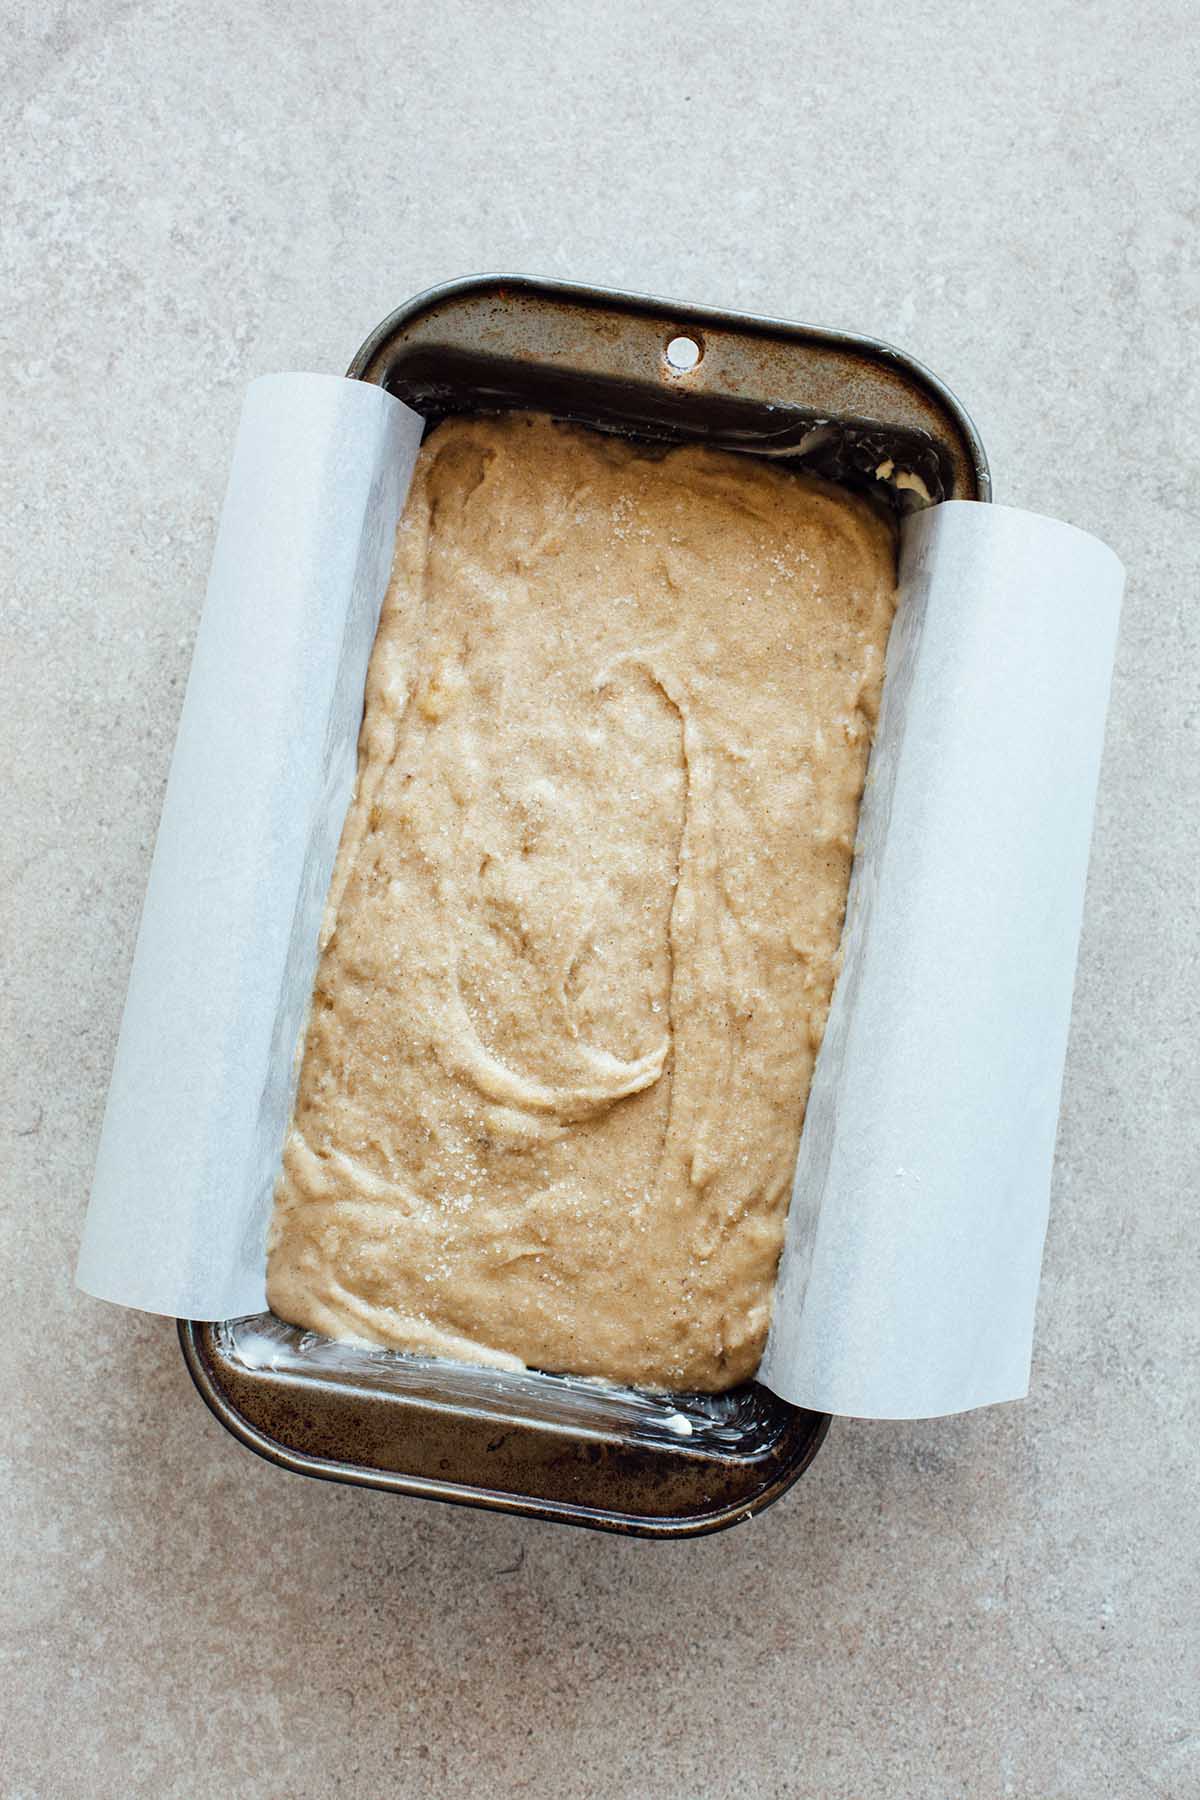 Unbaked banana bread batter in a loaf tin.